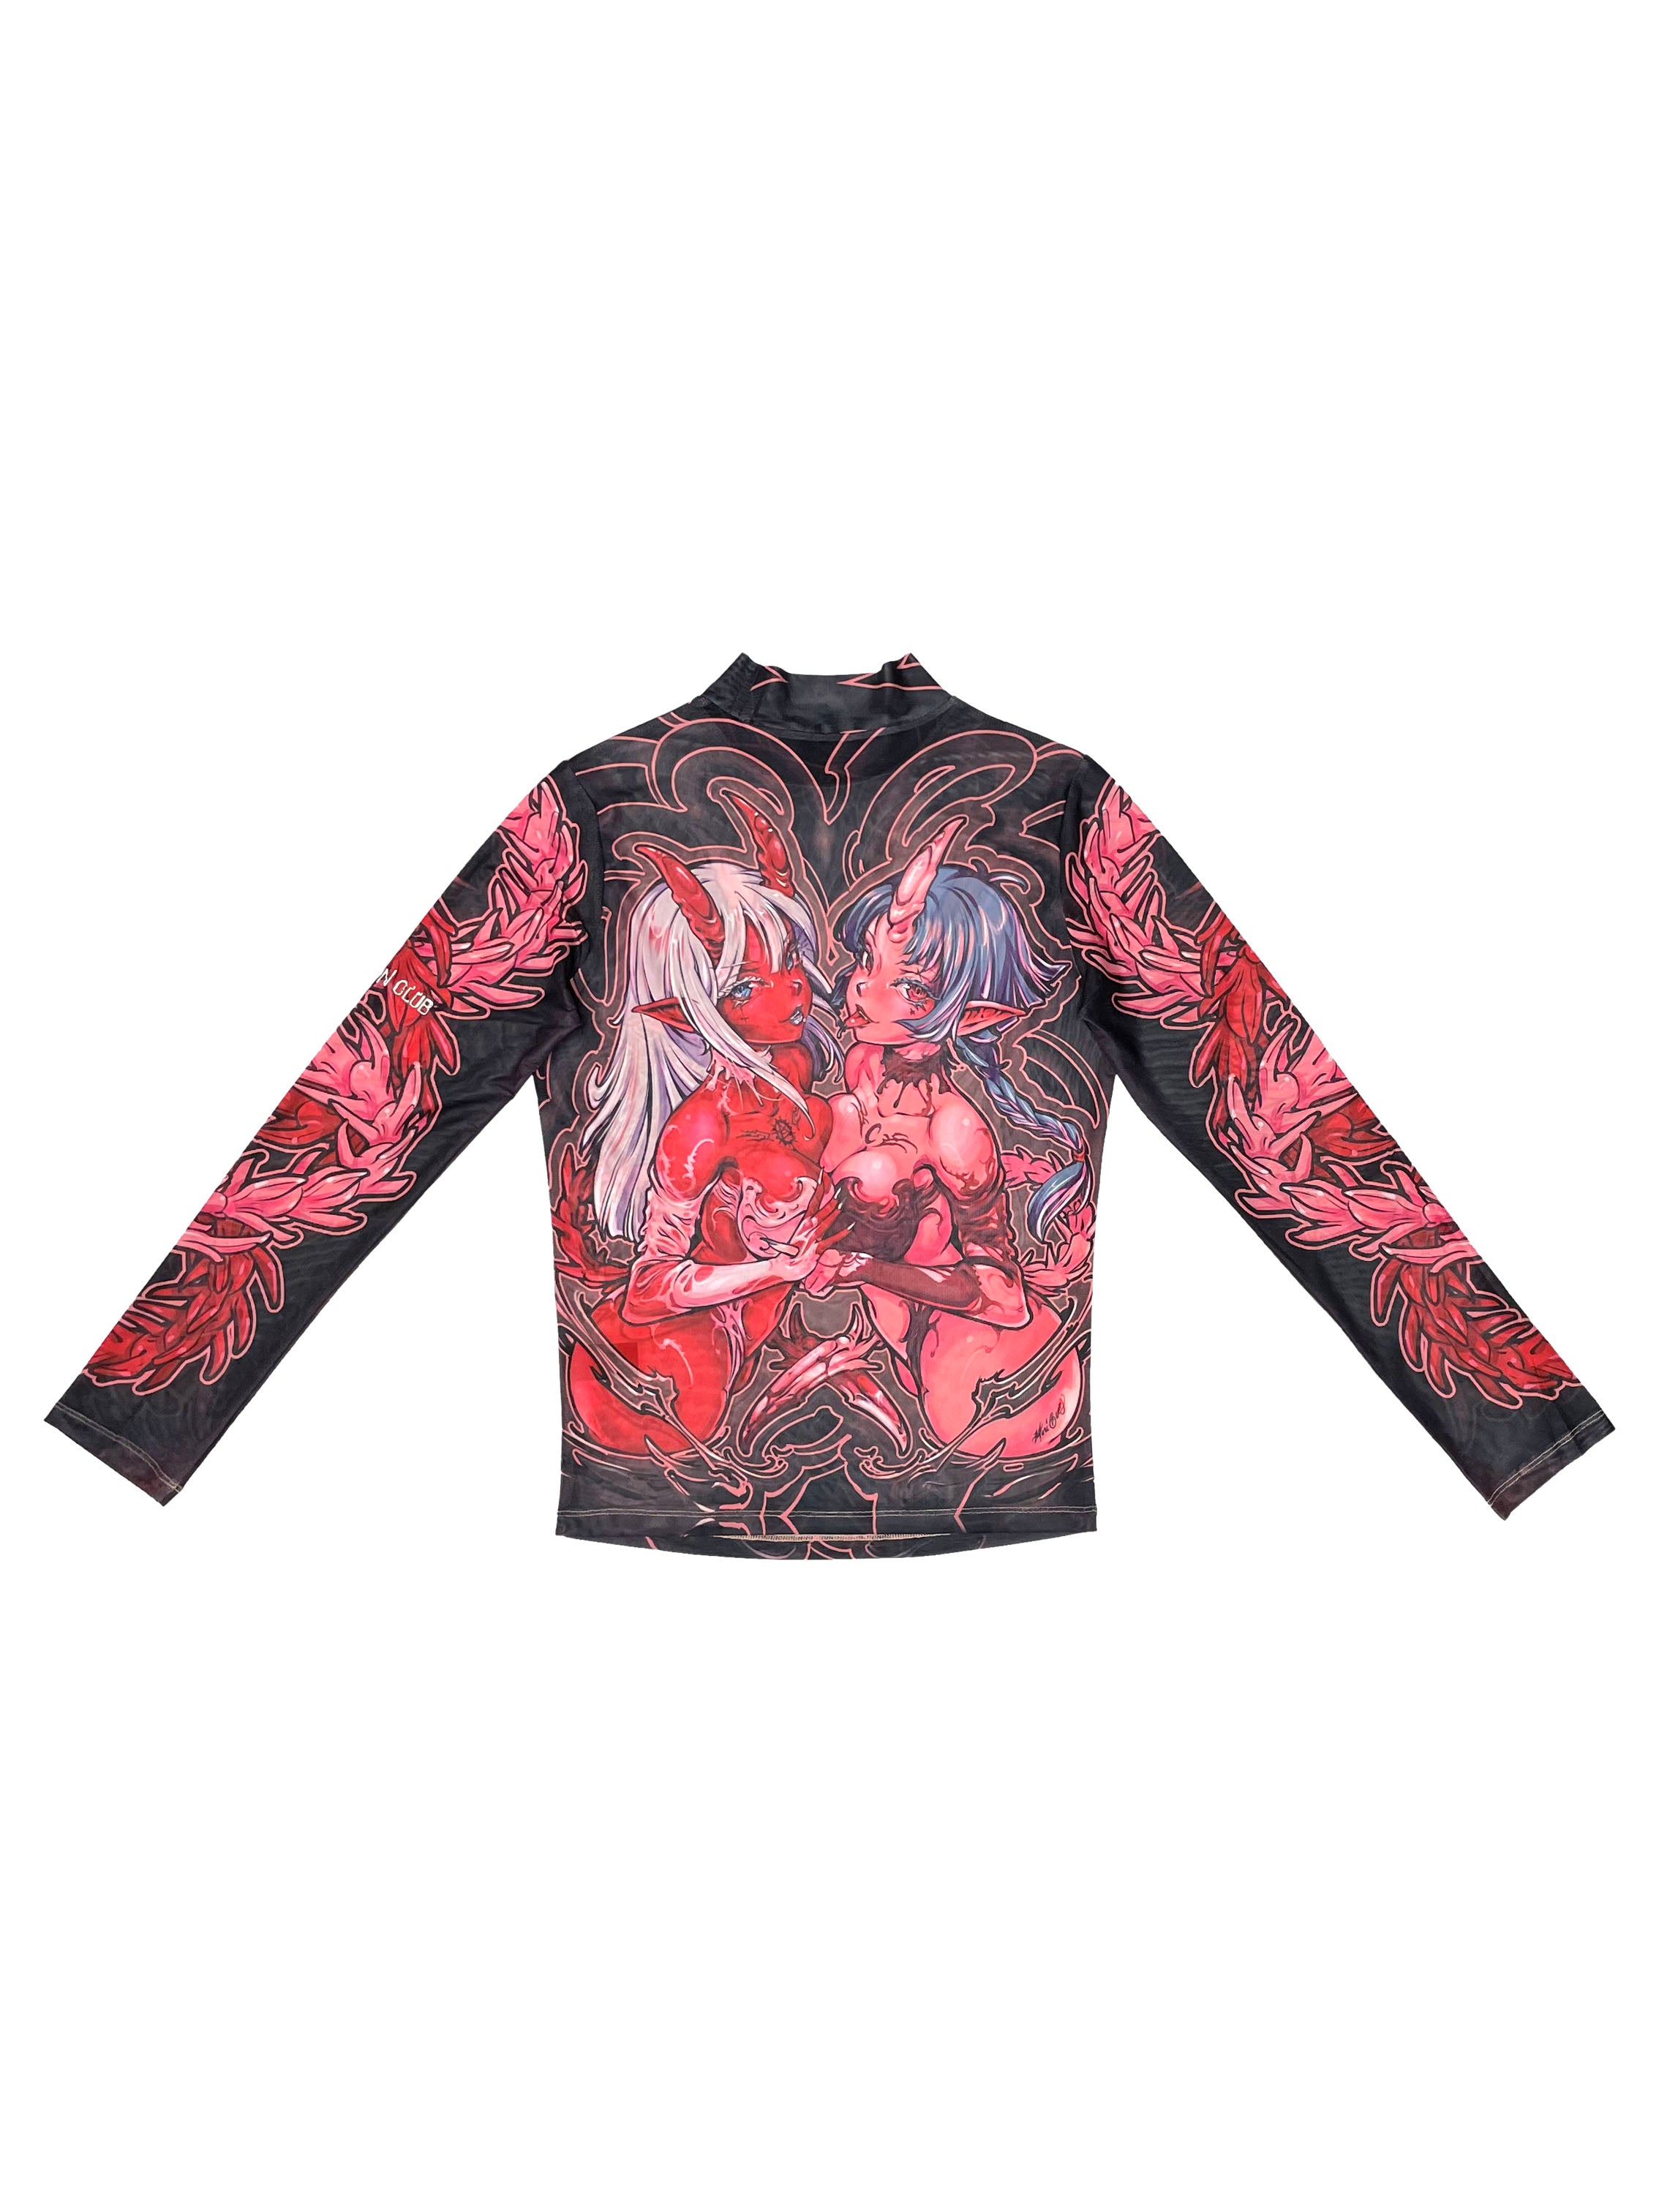 Jaded London Jaded Red And Black Space Game Long Sleeve Mesh Top for Men